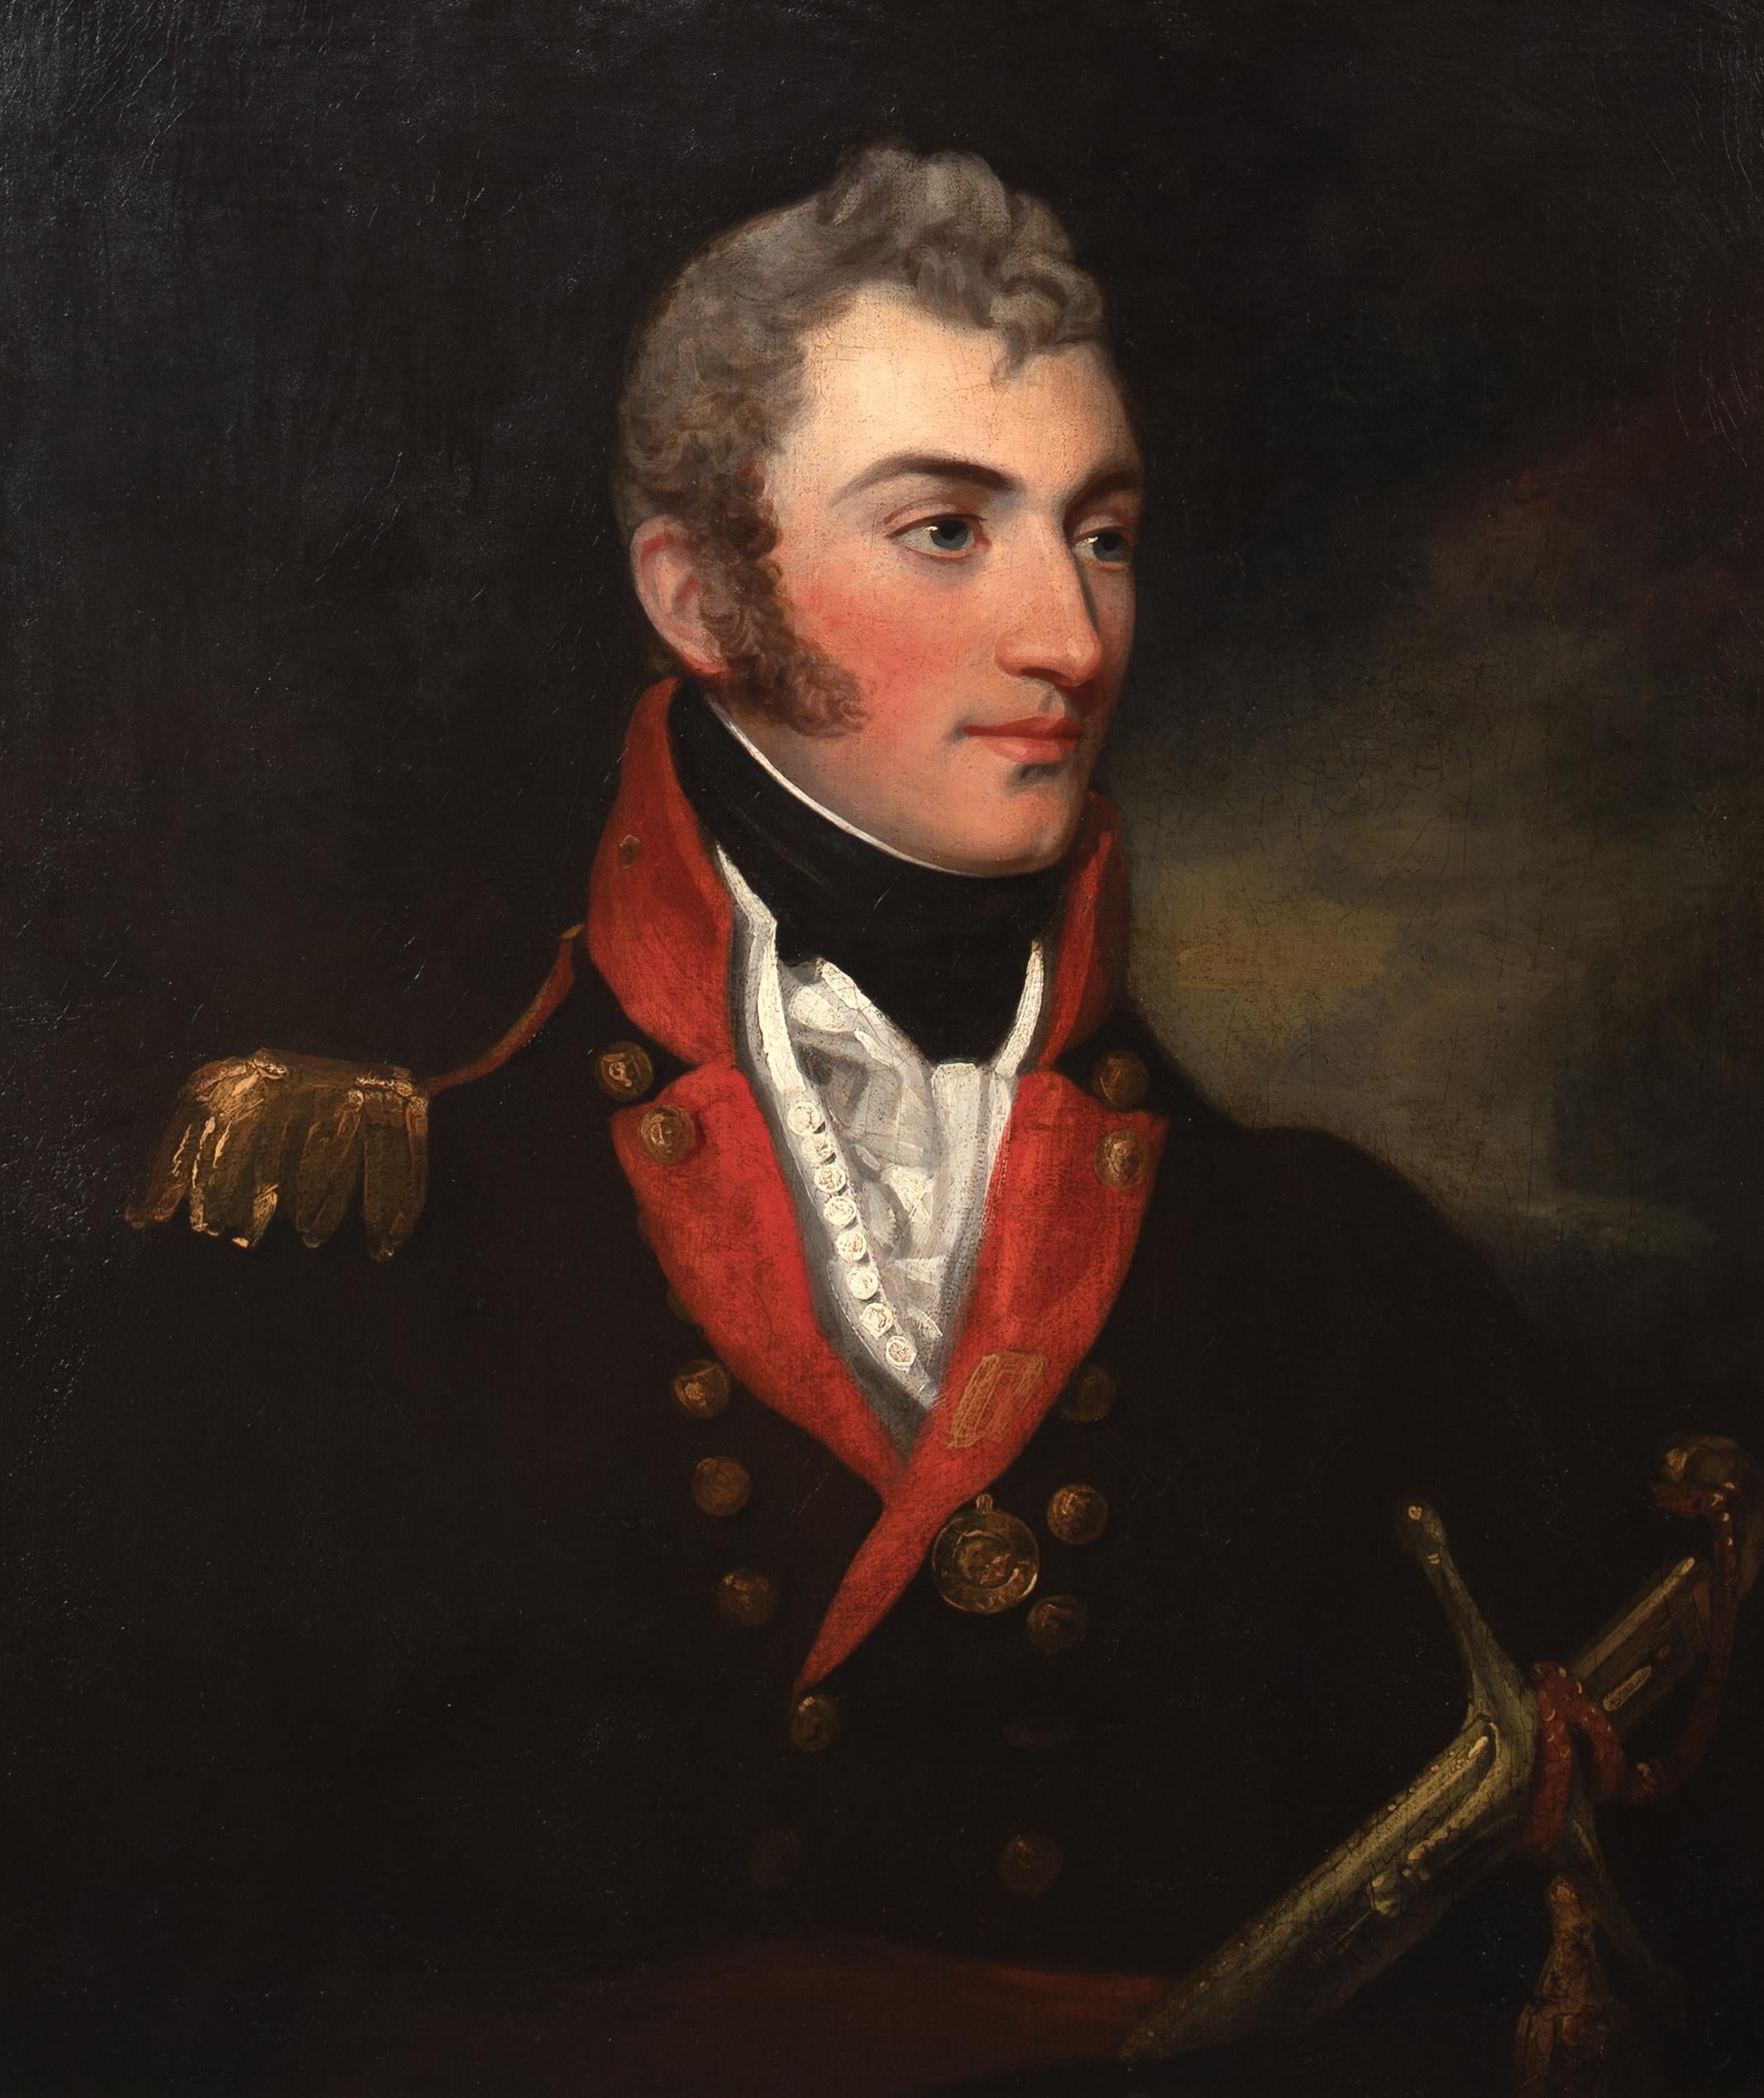 Major General Alexander Munro, Laird Of Novar. late 18th Century

Scottish School

Large late 18th Century portrait of Major General Alexander Munro, Laird of Novar and member of the Munro Baronets, oil on canvas. Excellent quality and condition